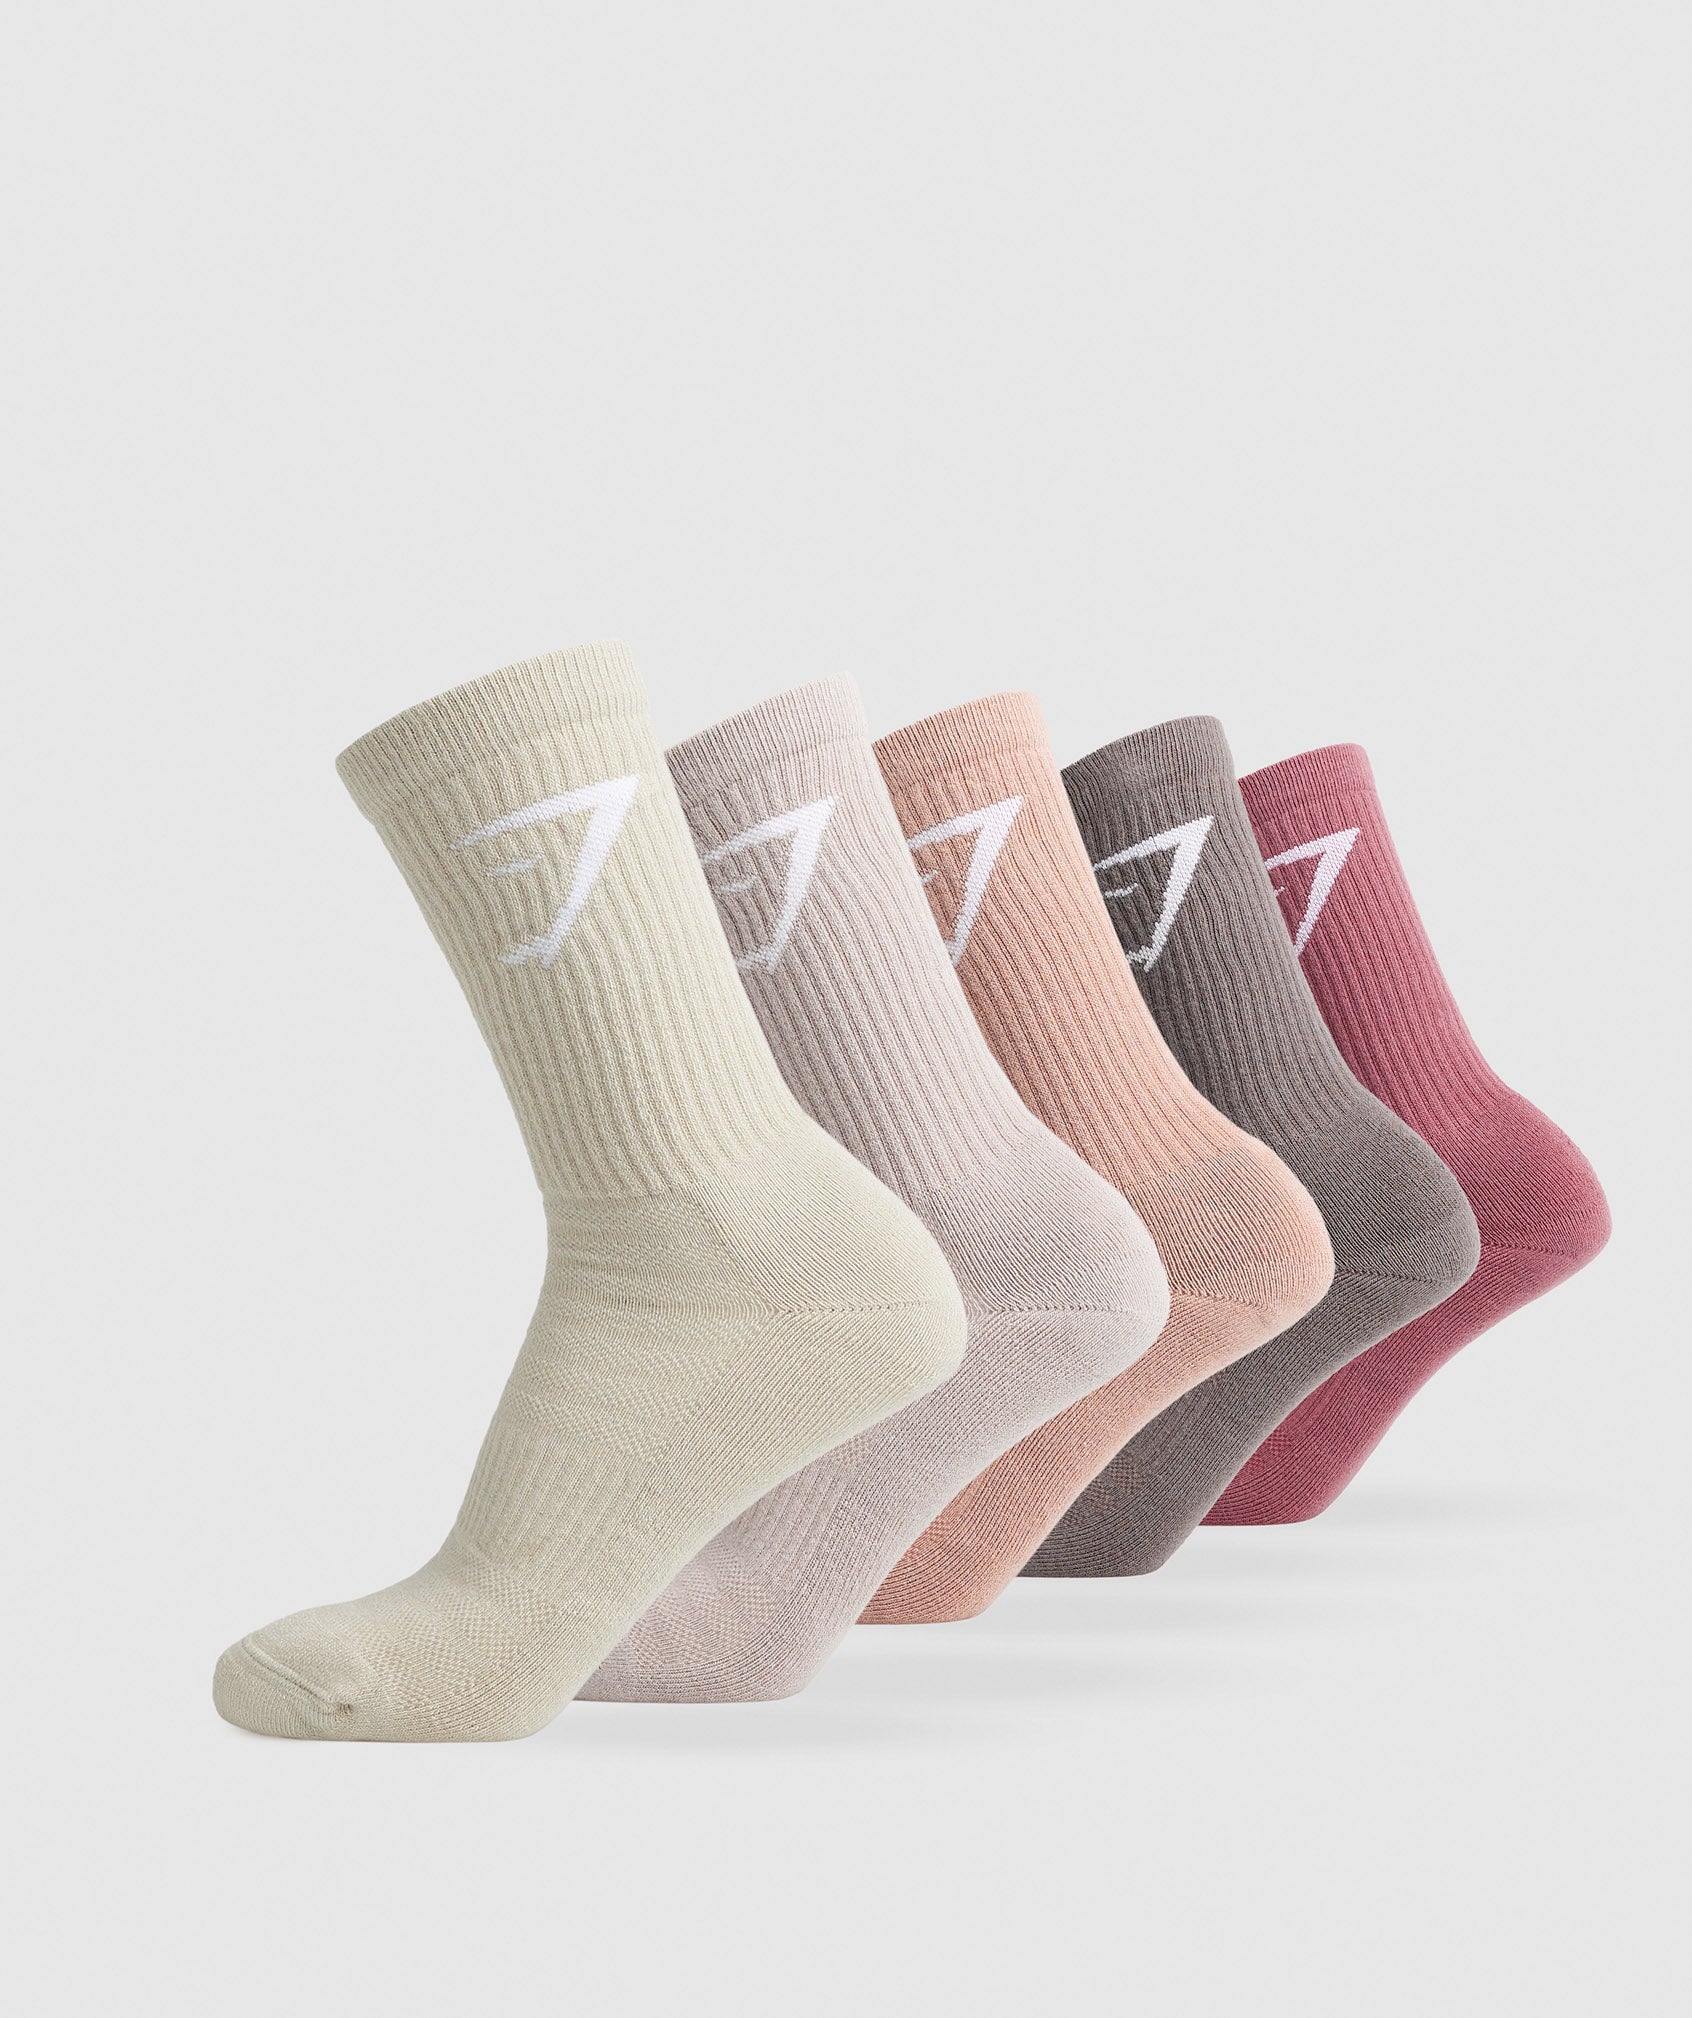 Crew Socks 5pk in Berry/Brown/Pink/Pink/Brown is out of stock